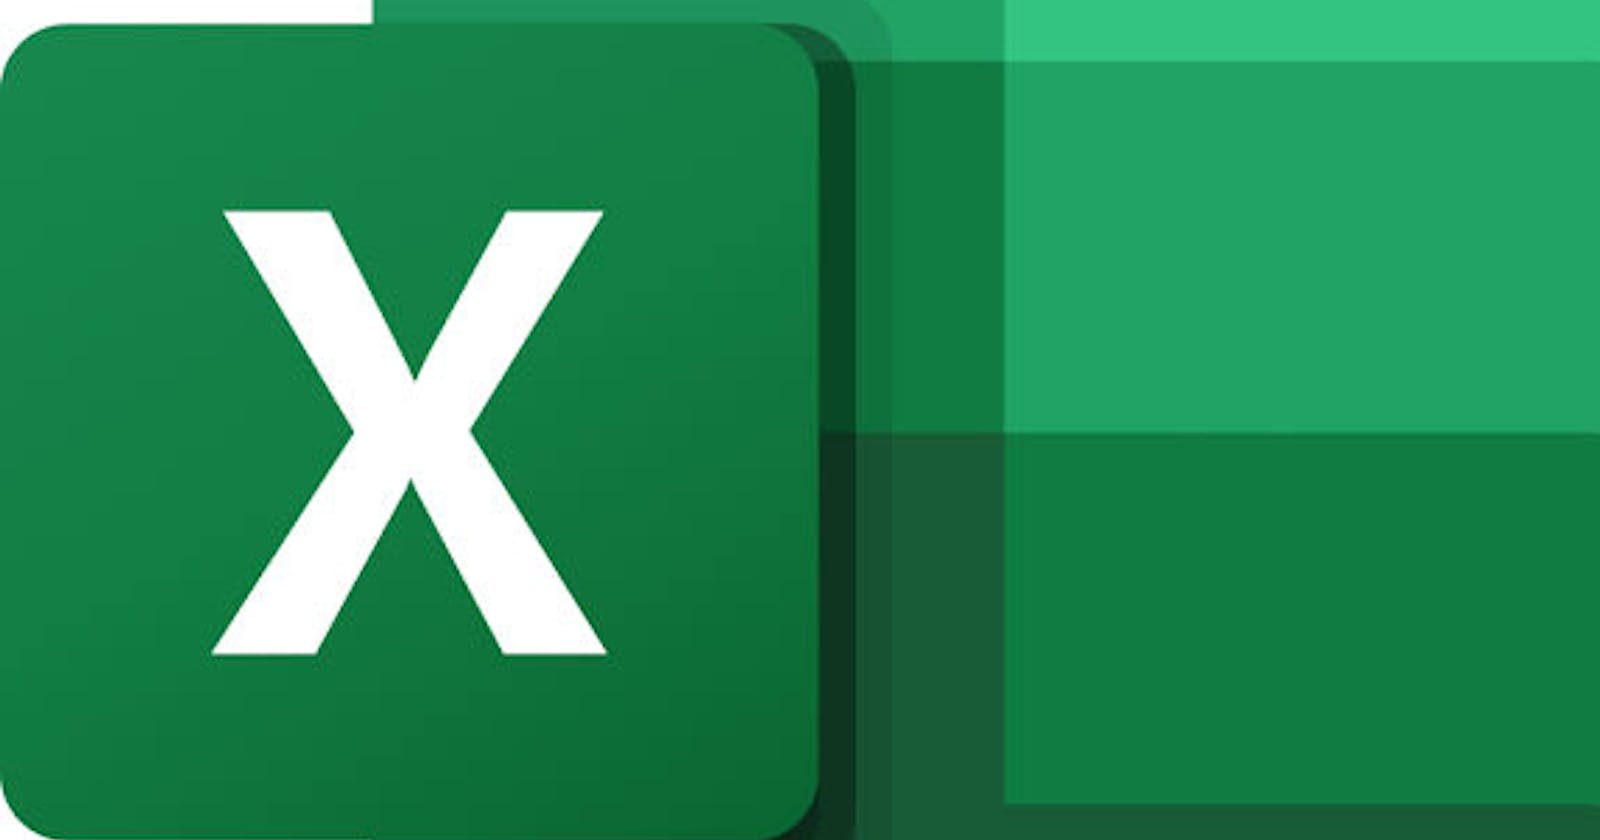 The VLOOKUP function in Excel